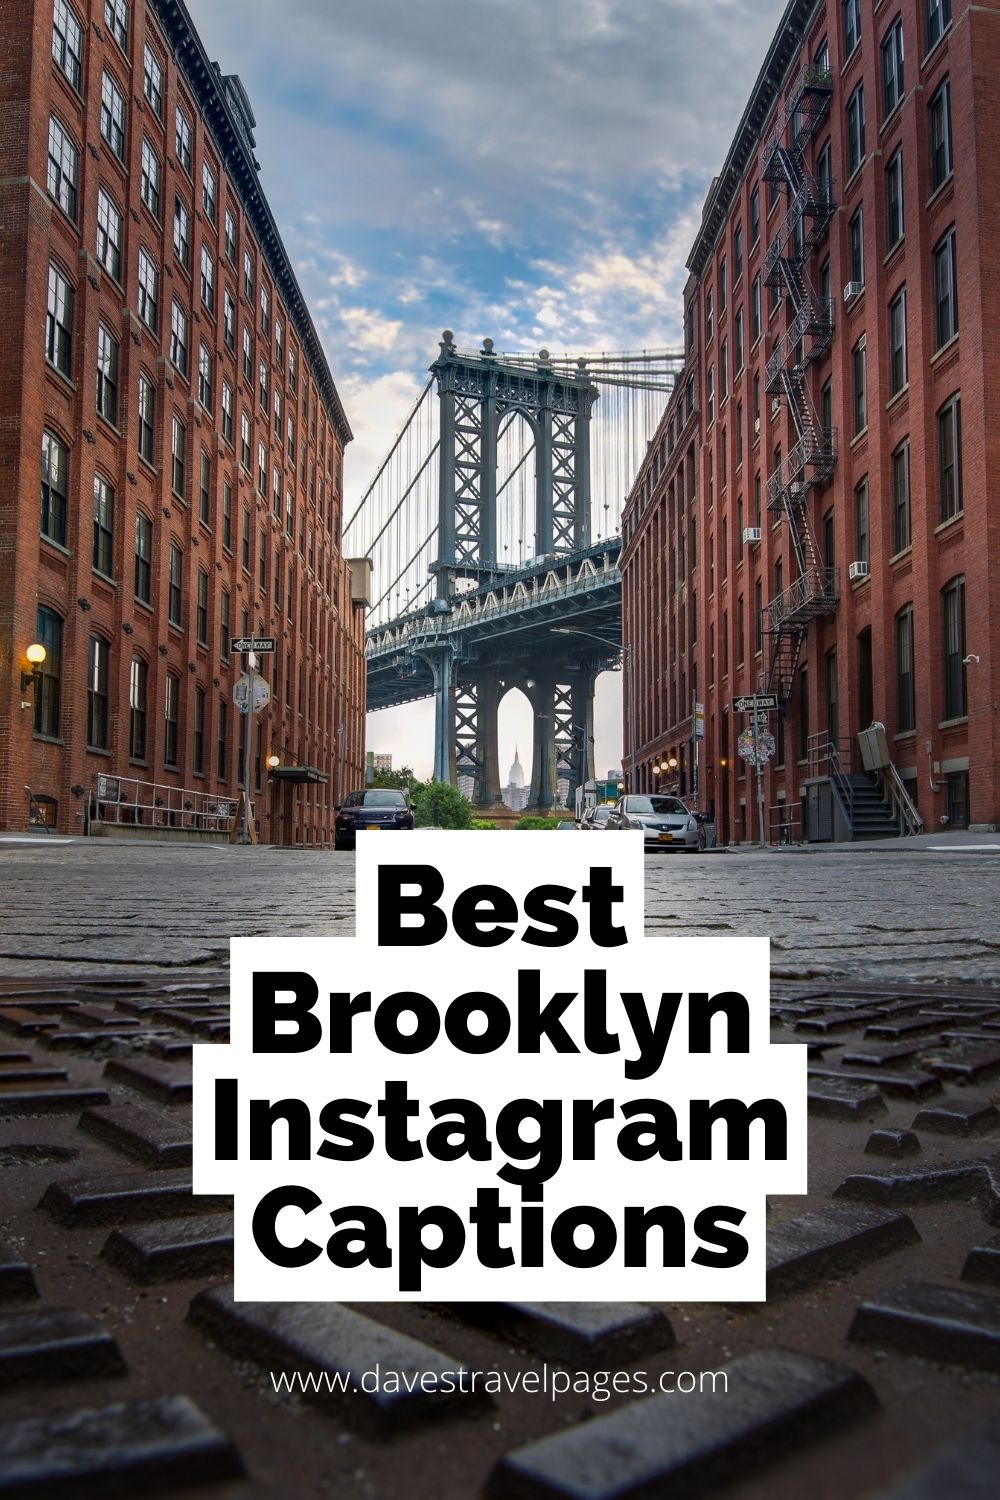 Instagram Captions About Brooklyn